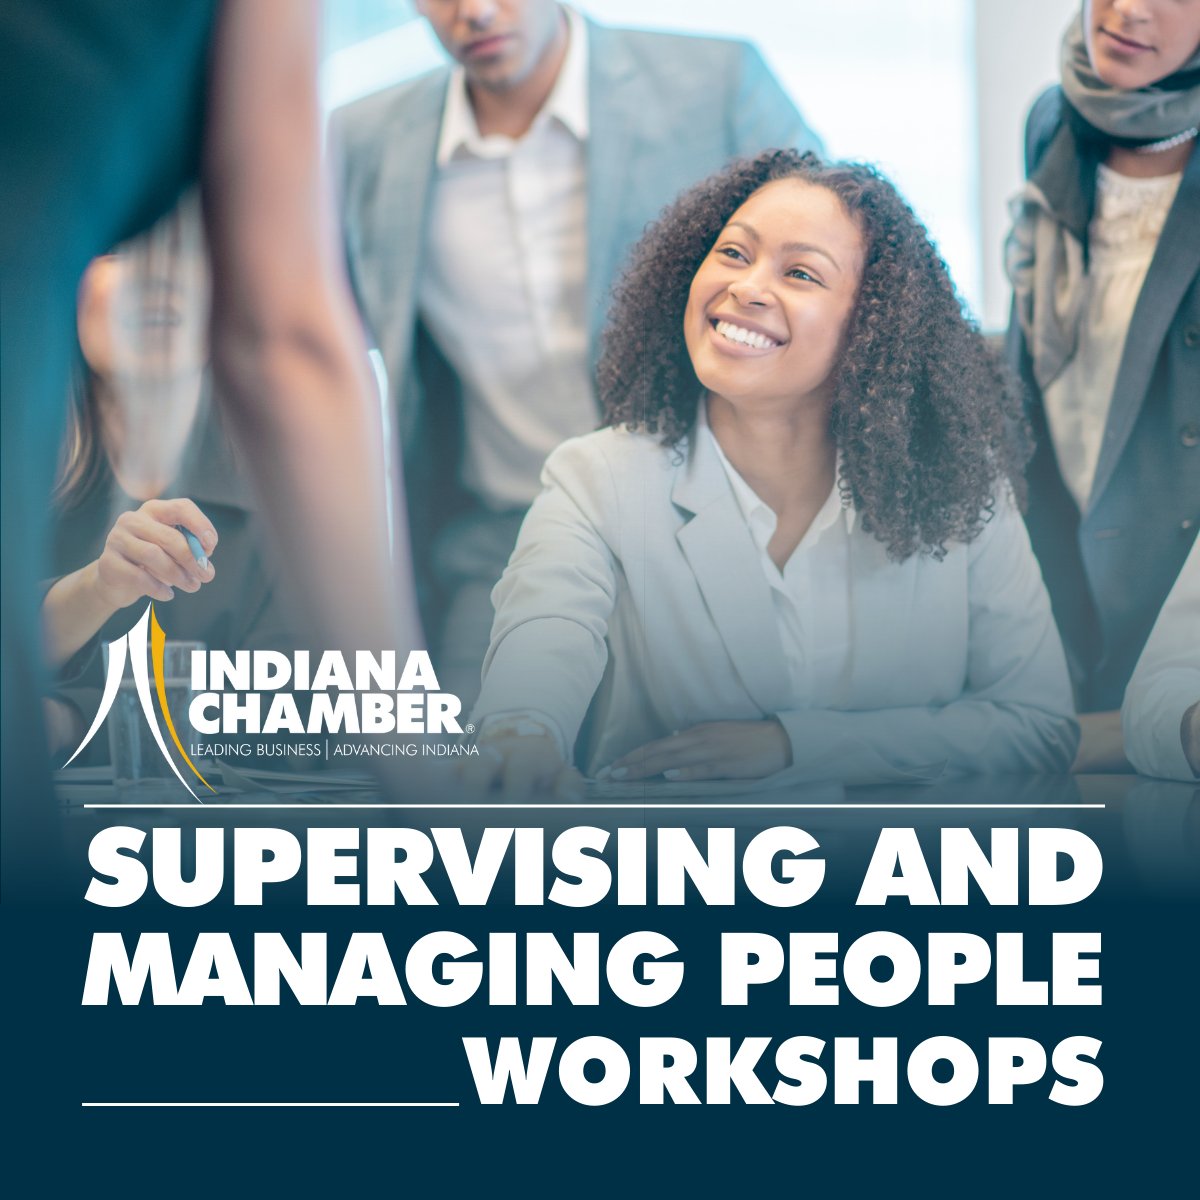 Join us for our Supervising & Managing People Workshop May 14-15 in Indy! Revamp and strengthen your supervisors’ dynamic with team members at this essential two-day seminar. | Presented by @FPLeaders. Register: indianachamber.com/event/supervis… #hr #supervising